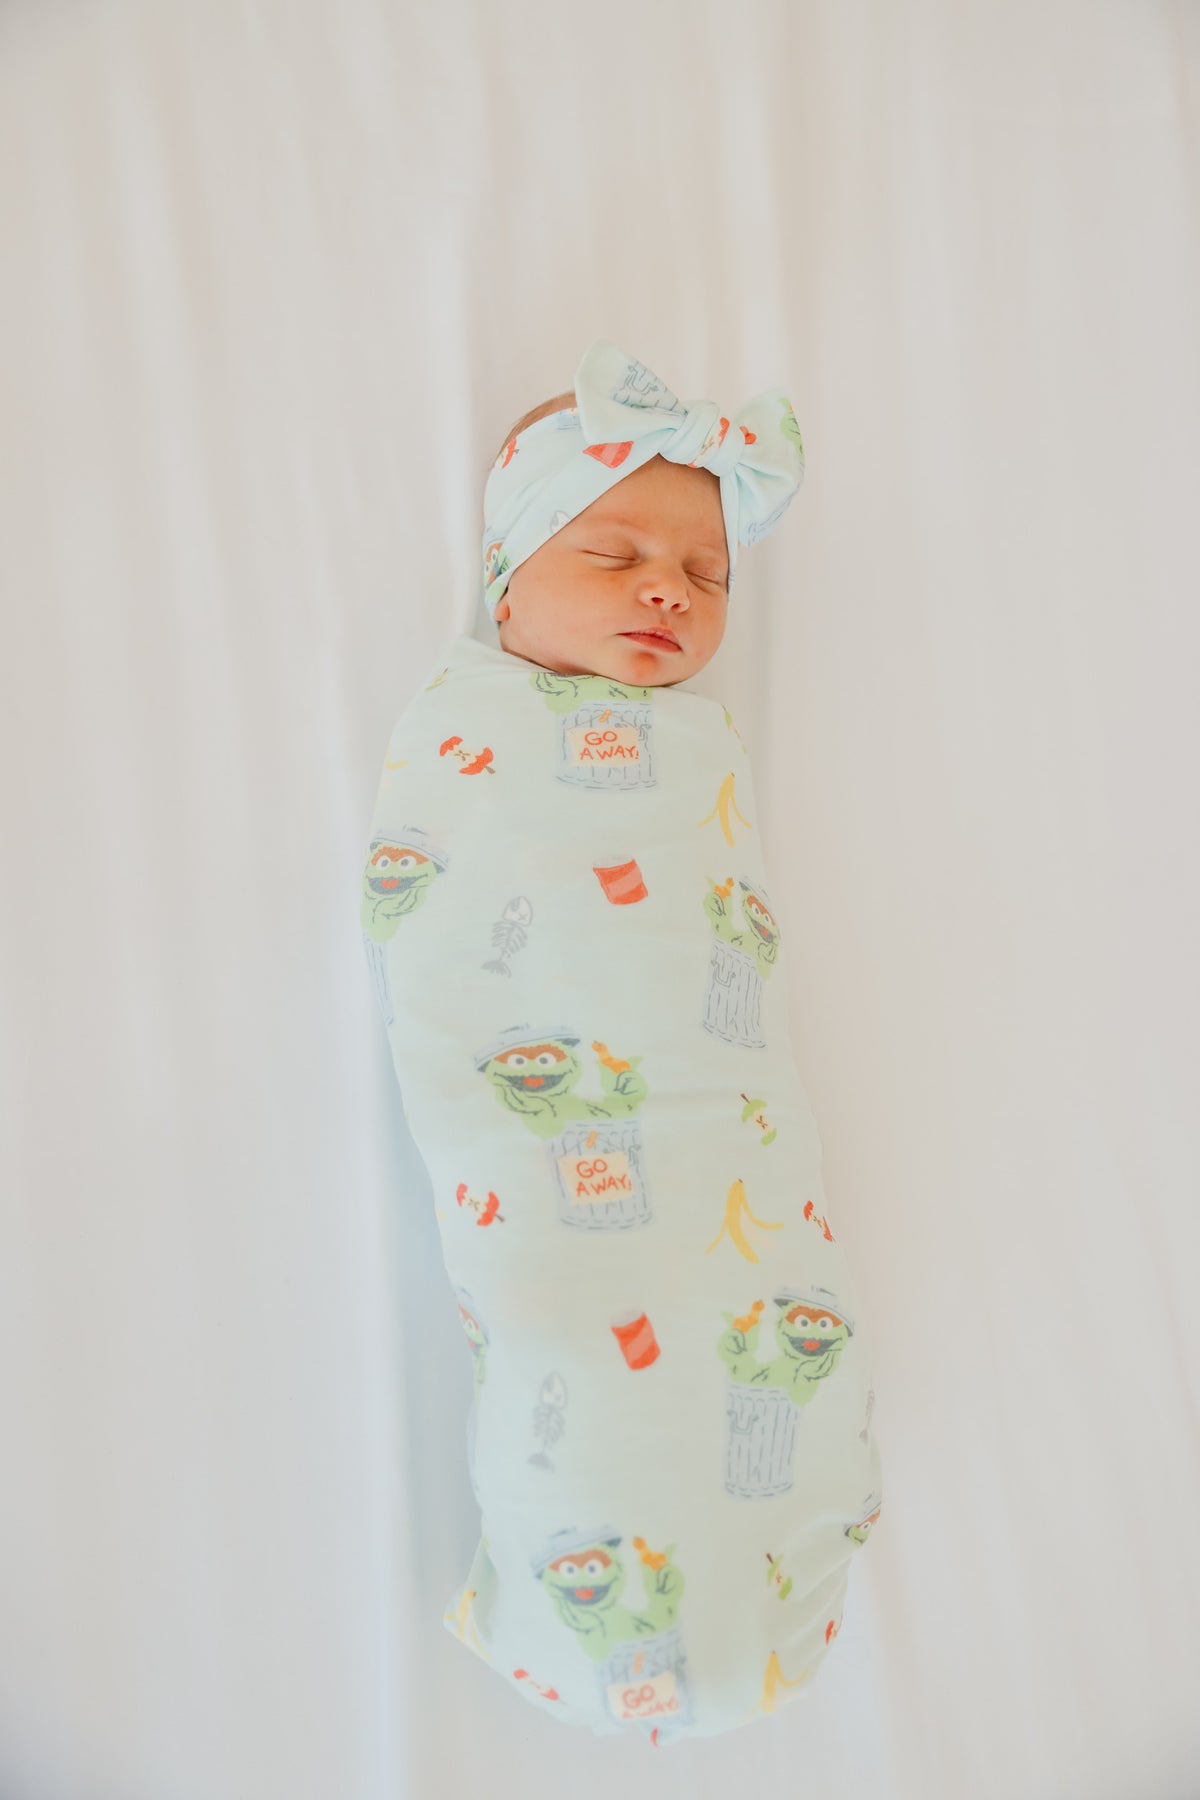 Knit Swaddle Blanket - Oscar the Grouch